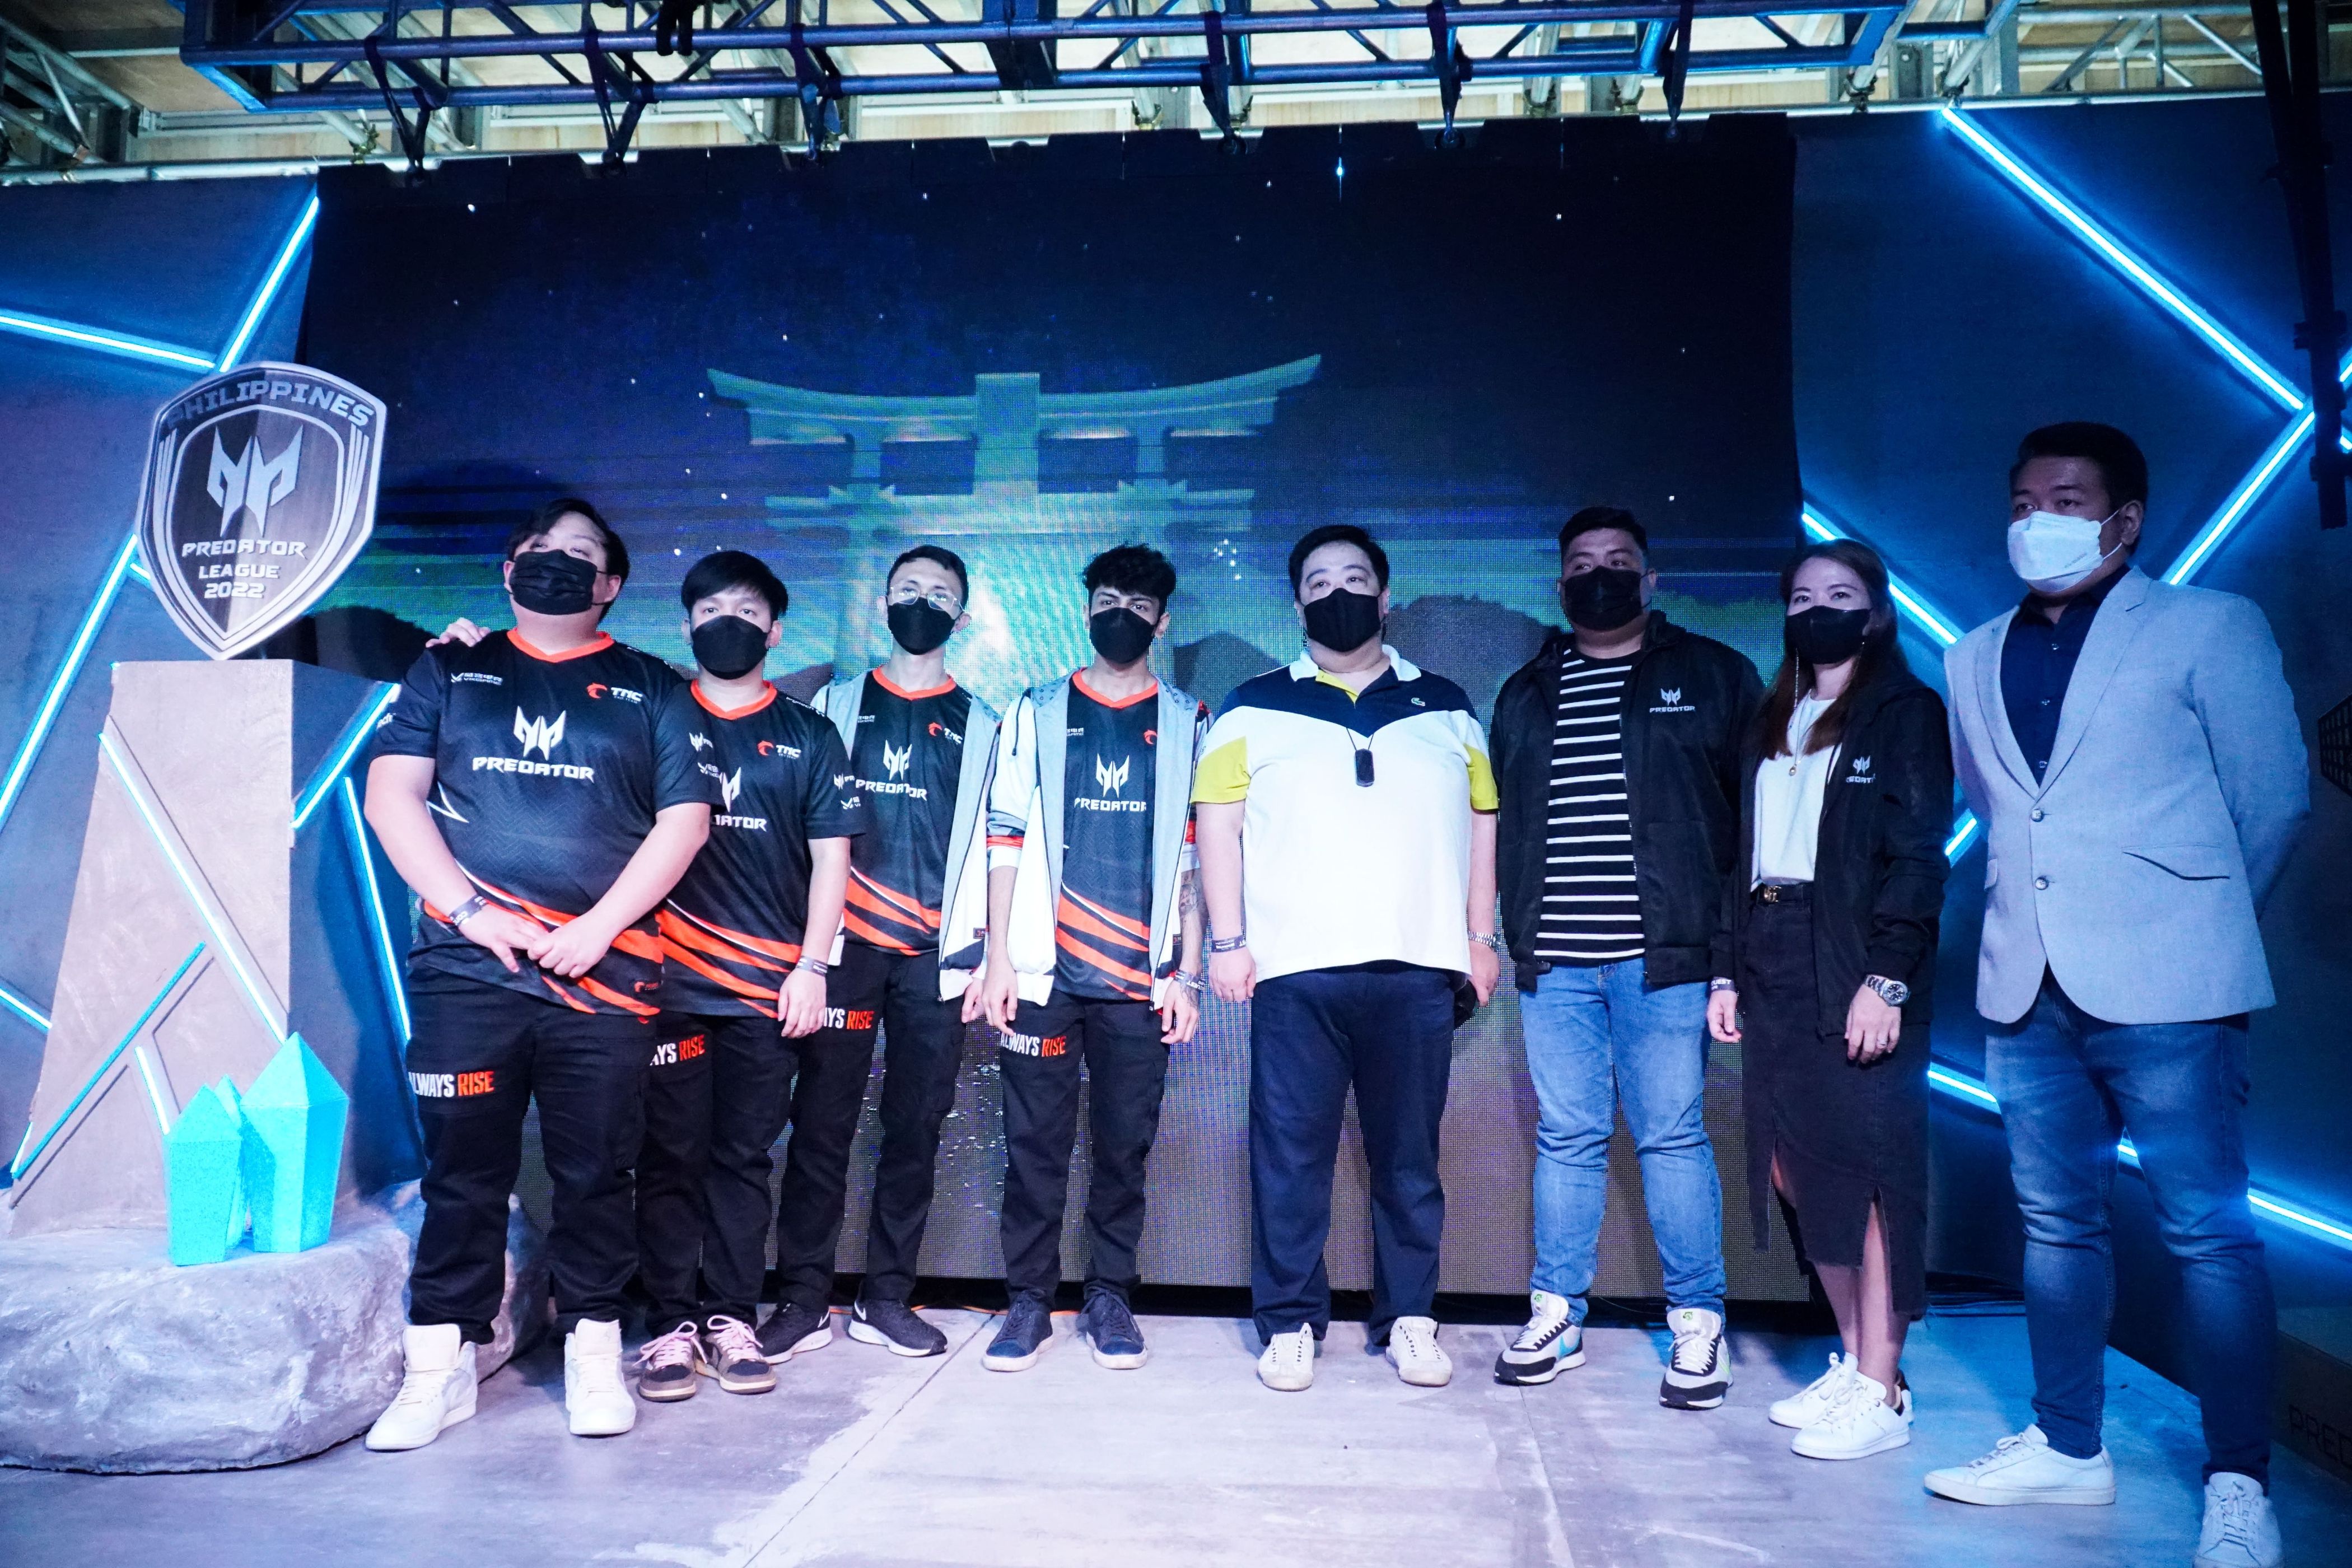 Team HAVK crowned champions of Acer Predator League 2022 and they